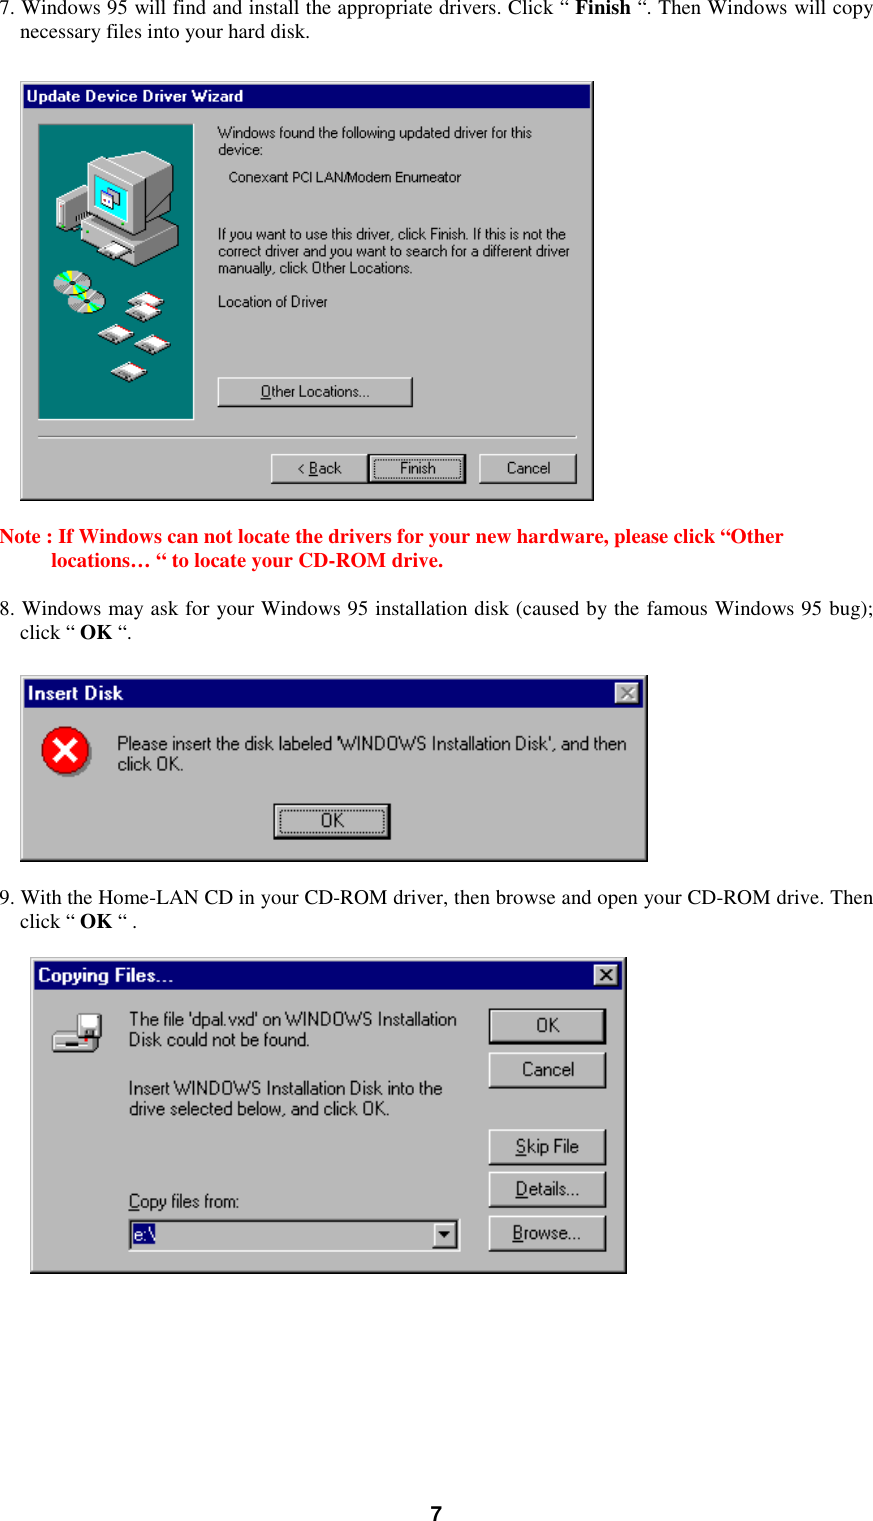 77. Windows 95 will find and install the appropriate drivers. Click “ Finish “. Then Windows will copynecessary files into your hard disk.Note : If Windows can not locate the drivers for your new hardware, please click “Otherlocations… “ to locate your CD-ROM drive.8. Windows may ask for your Windows 95 installation disk (caused by the famous Windows 95 bug);click “ OK “.9. With the Home-LAN CD in your CD-ROM driver, then browse and open your CD-ROM drive. Thenclick “ OK “ .